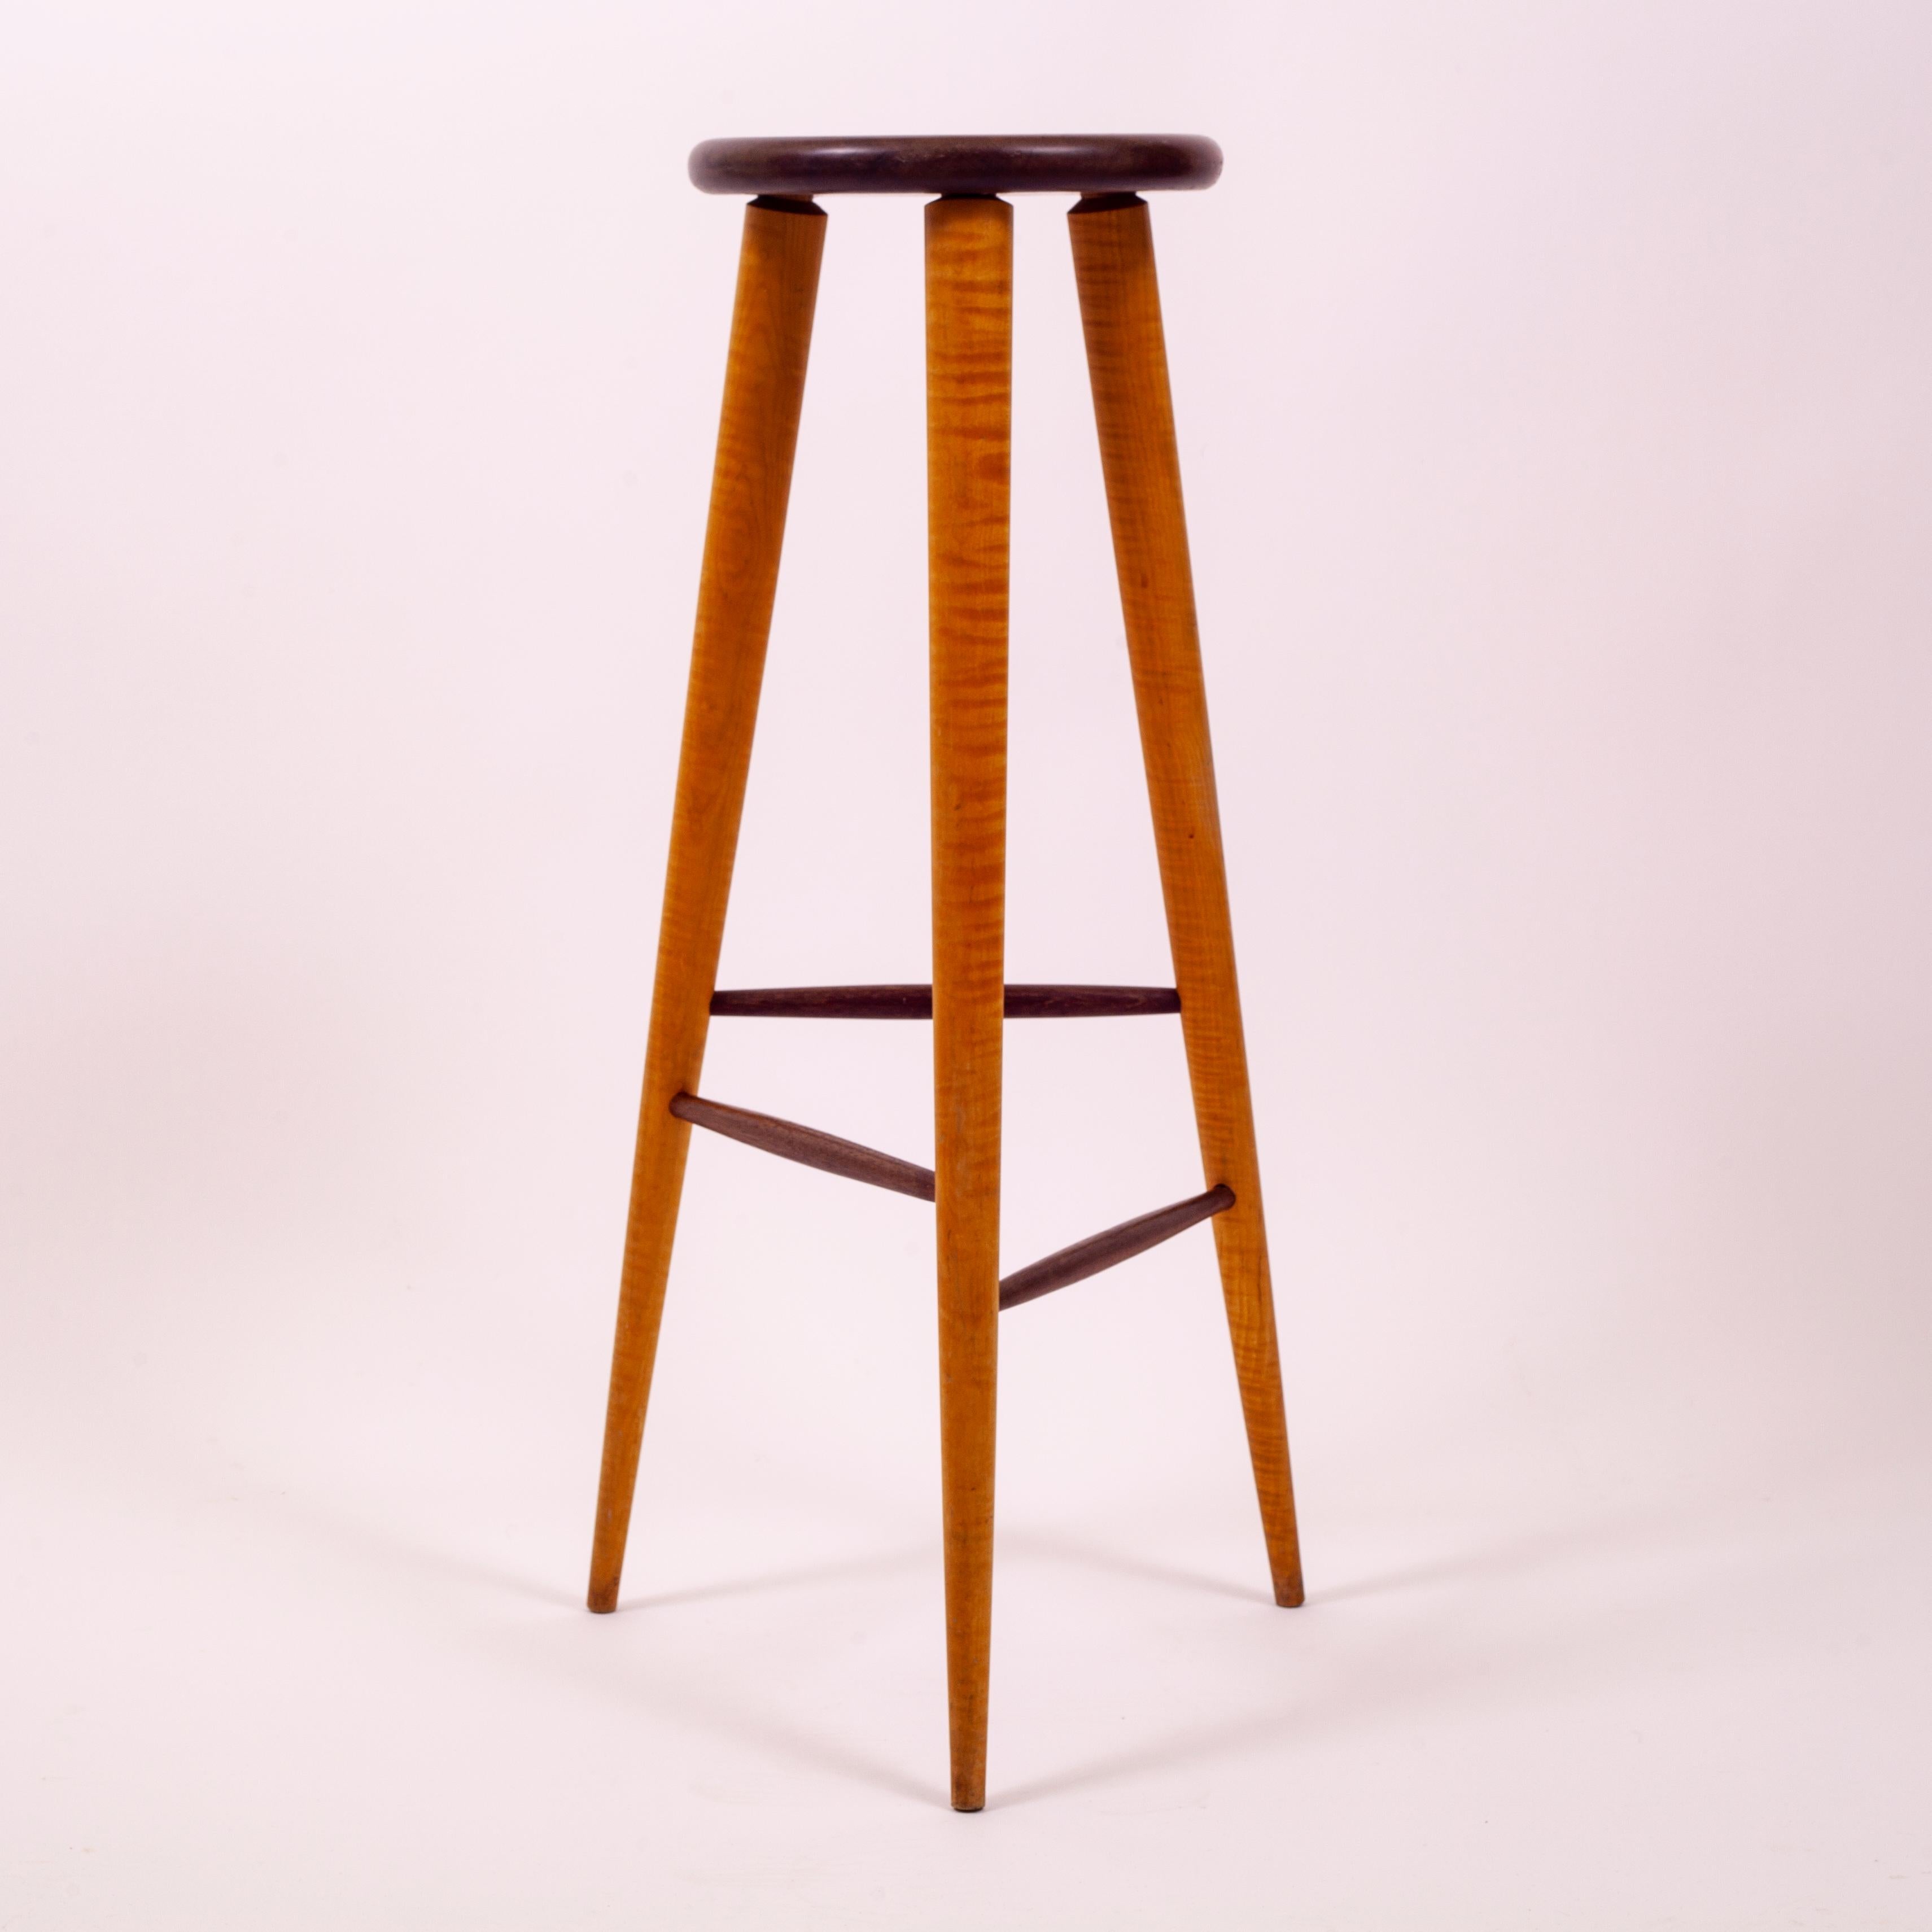 Studio stool or pedestal comprised of an artfully chosen, thick solid walnut disc atop 3 tapering legs of highly figured honey colored tiger maple. Wedged joinery and contrasting dark stretchers of varying heights make this elongated form quite